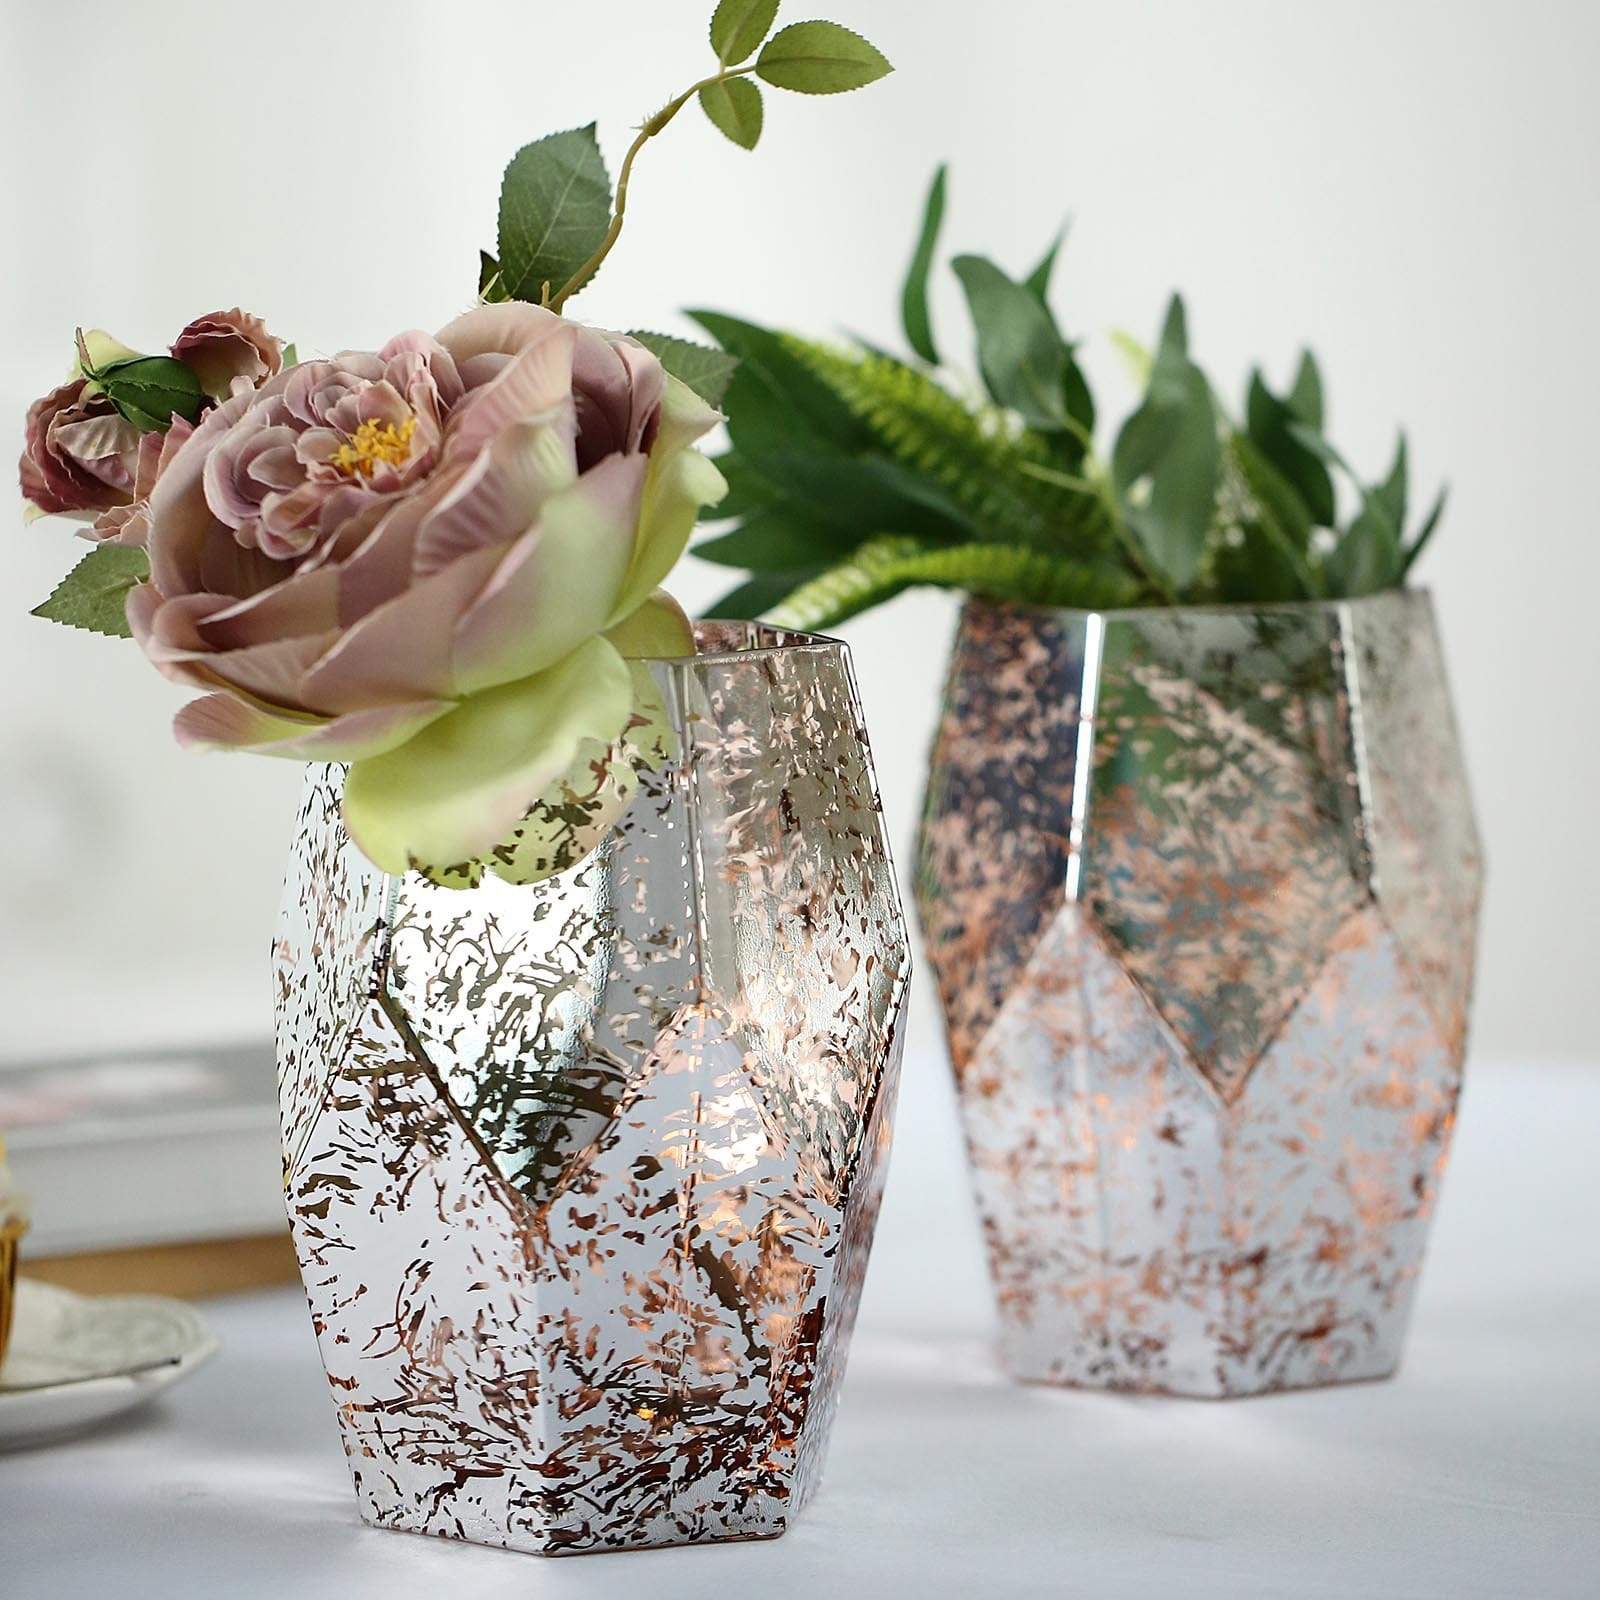 2 pcs 8 in tall Silver with Rose Gold Geometric Mercury Glass Candle Holders Vases Centerpieces